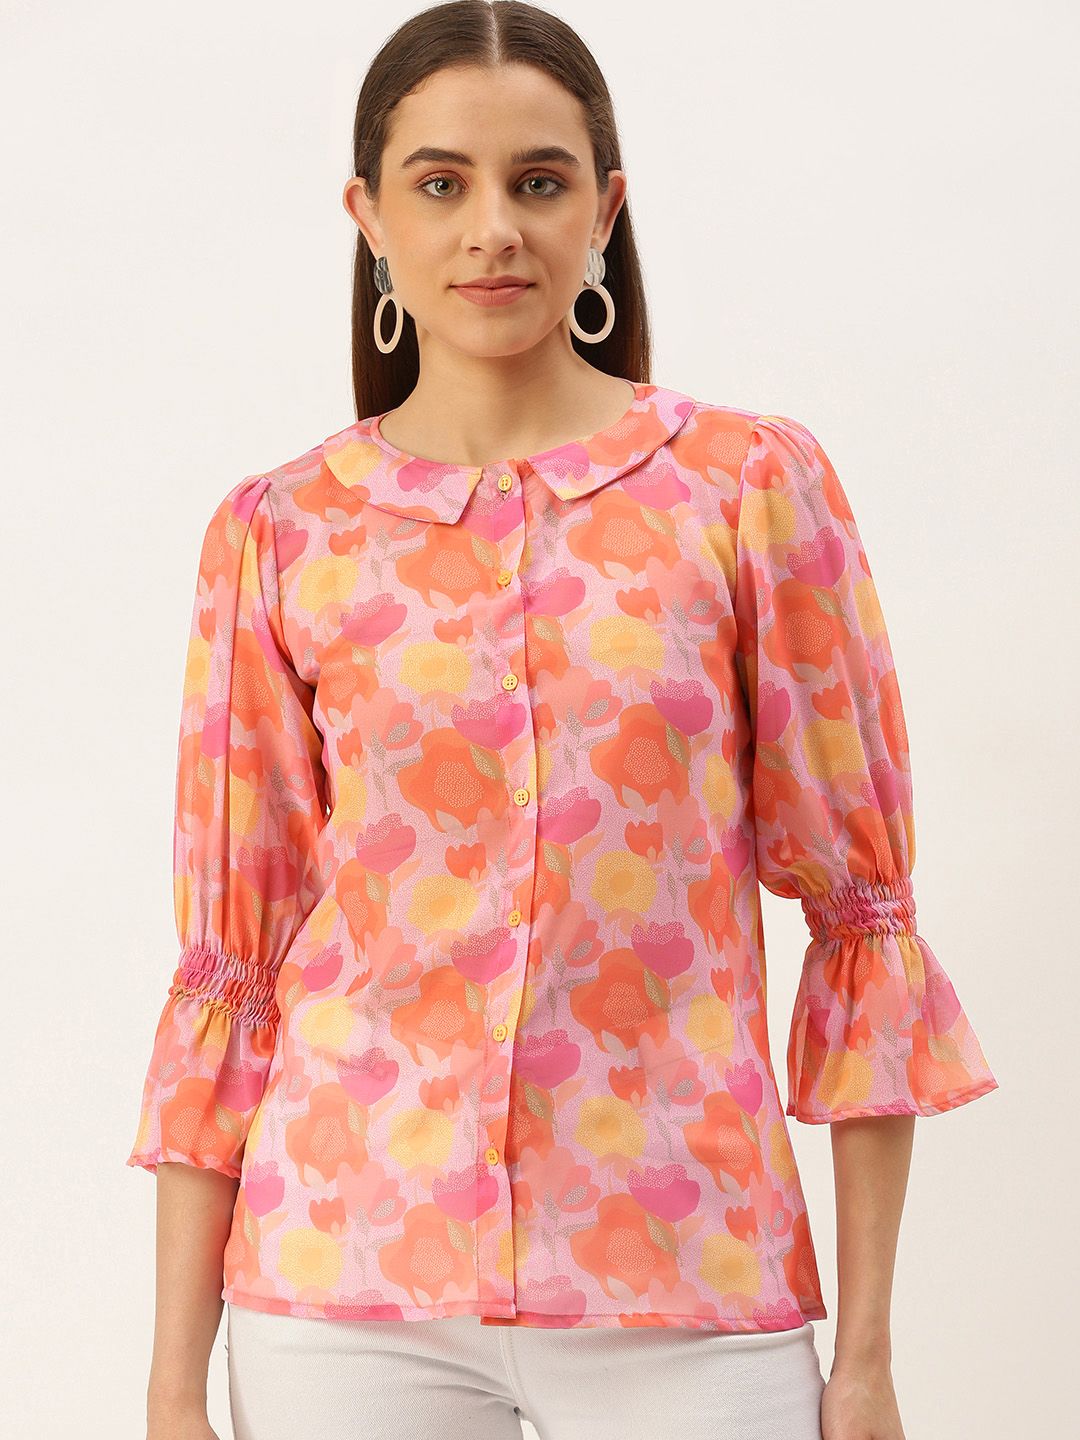 MELOSO Pink & Orange Floral Print Peter Pan Collar Smocked Georgette Shirt Style Top Price in India